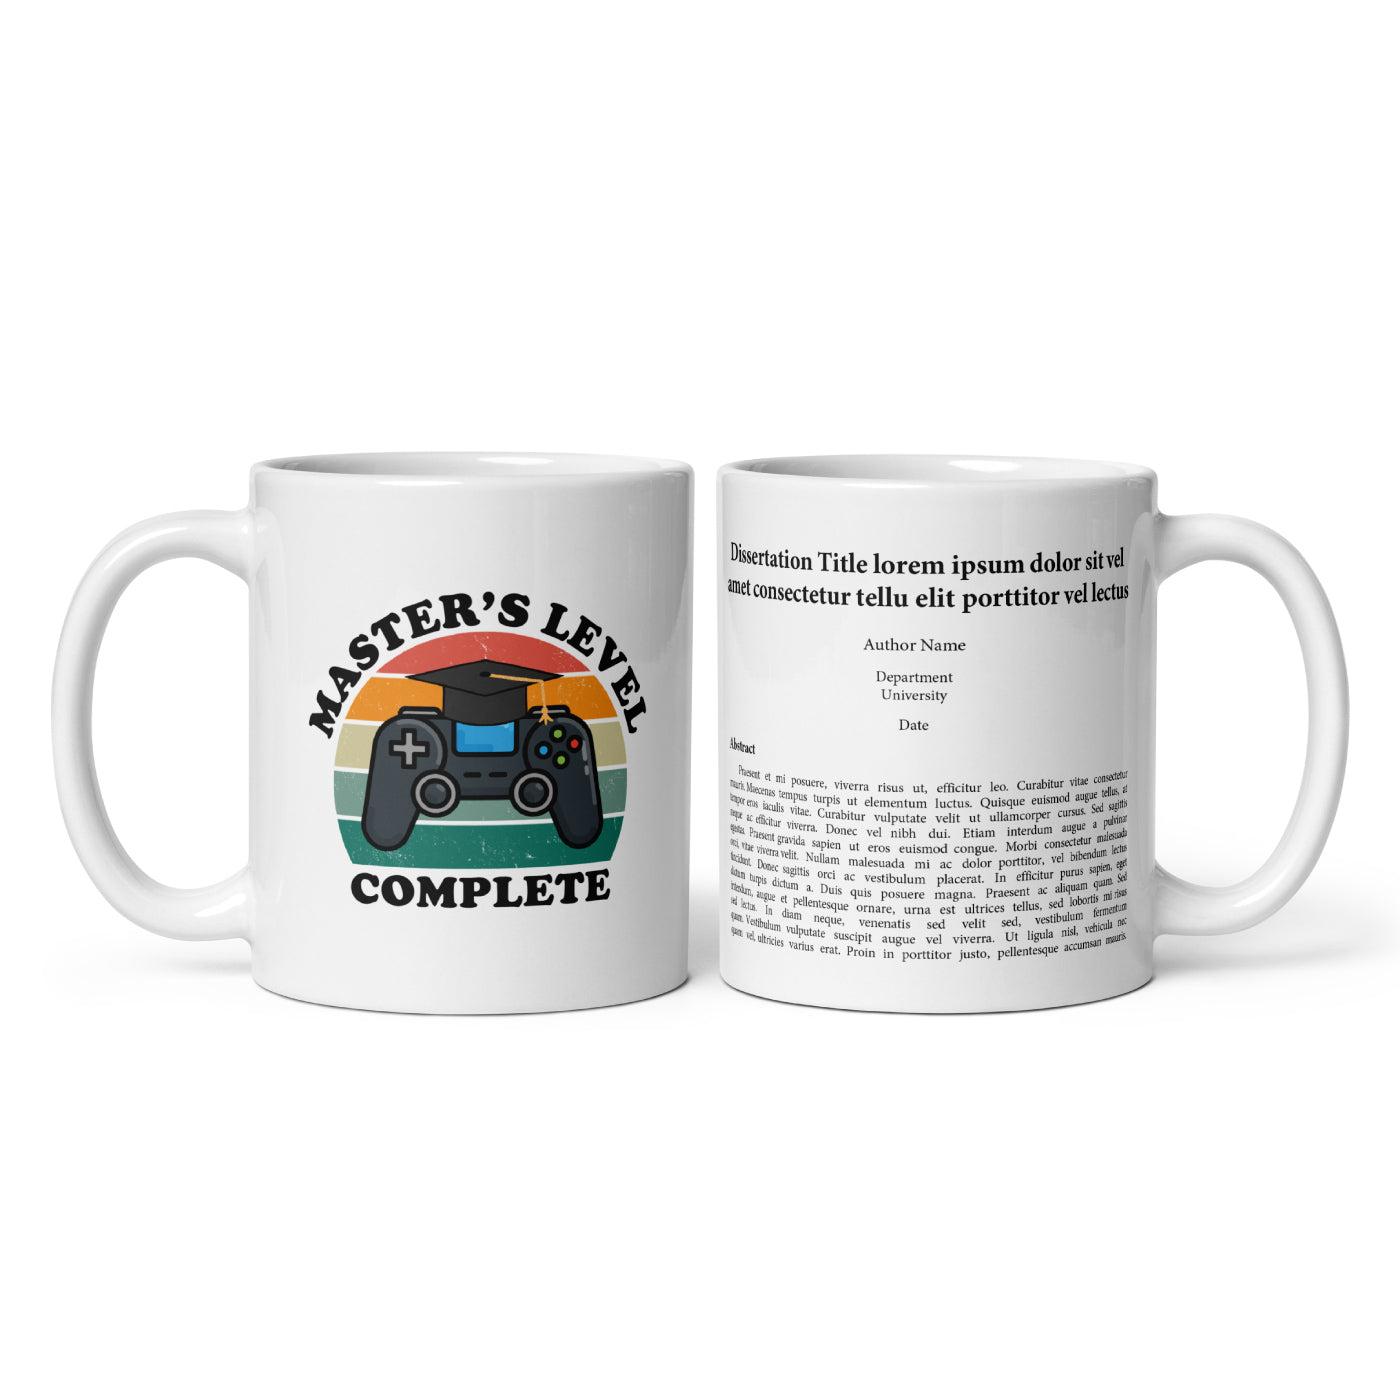 Graduation gift for her or him - master's thesis mug